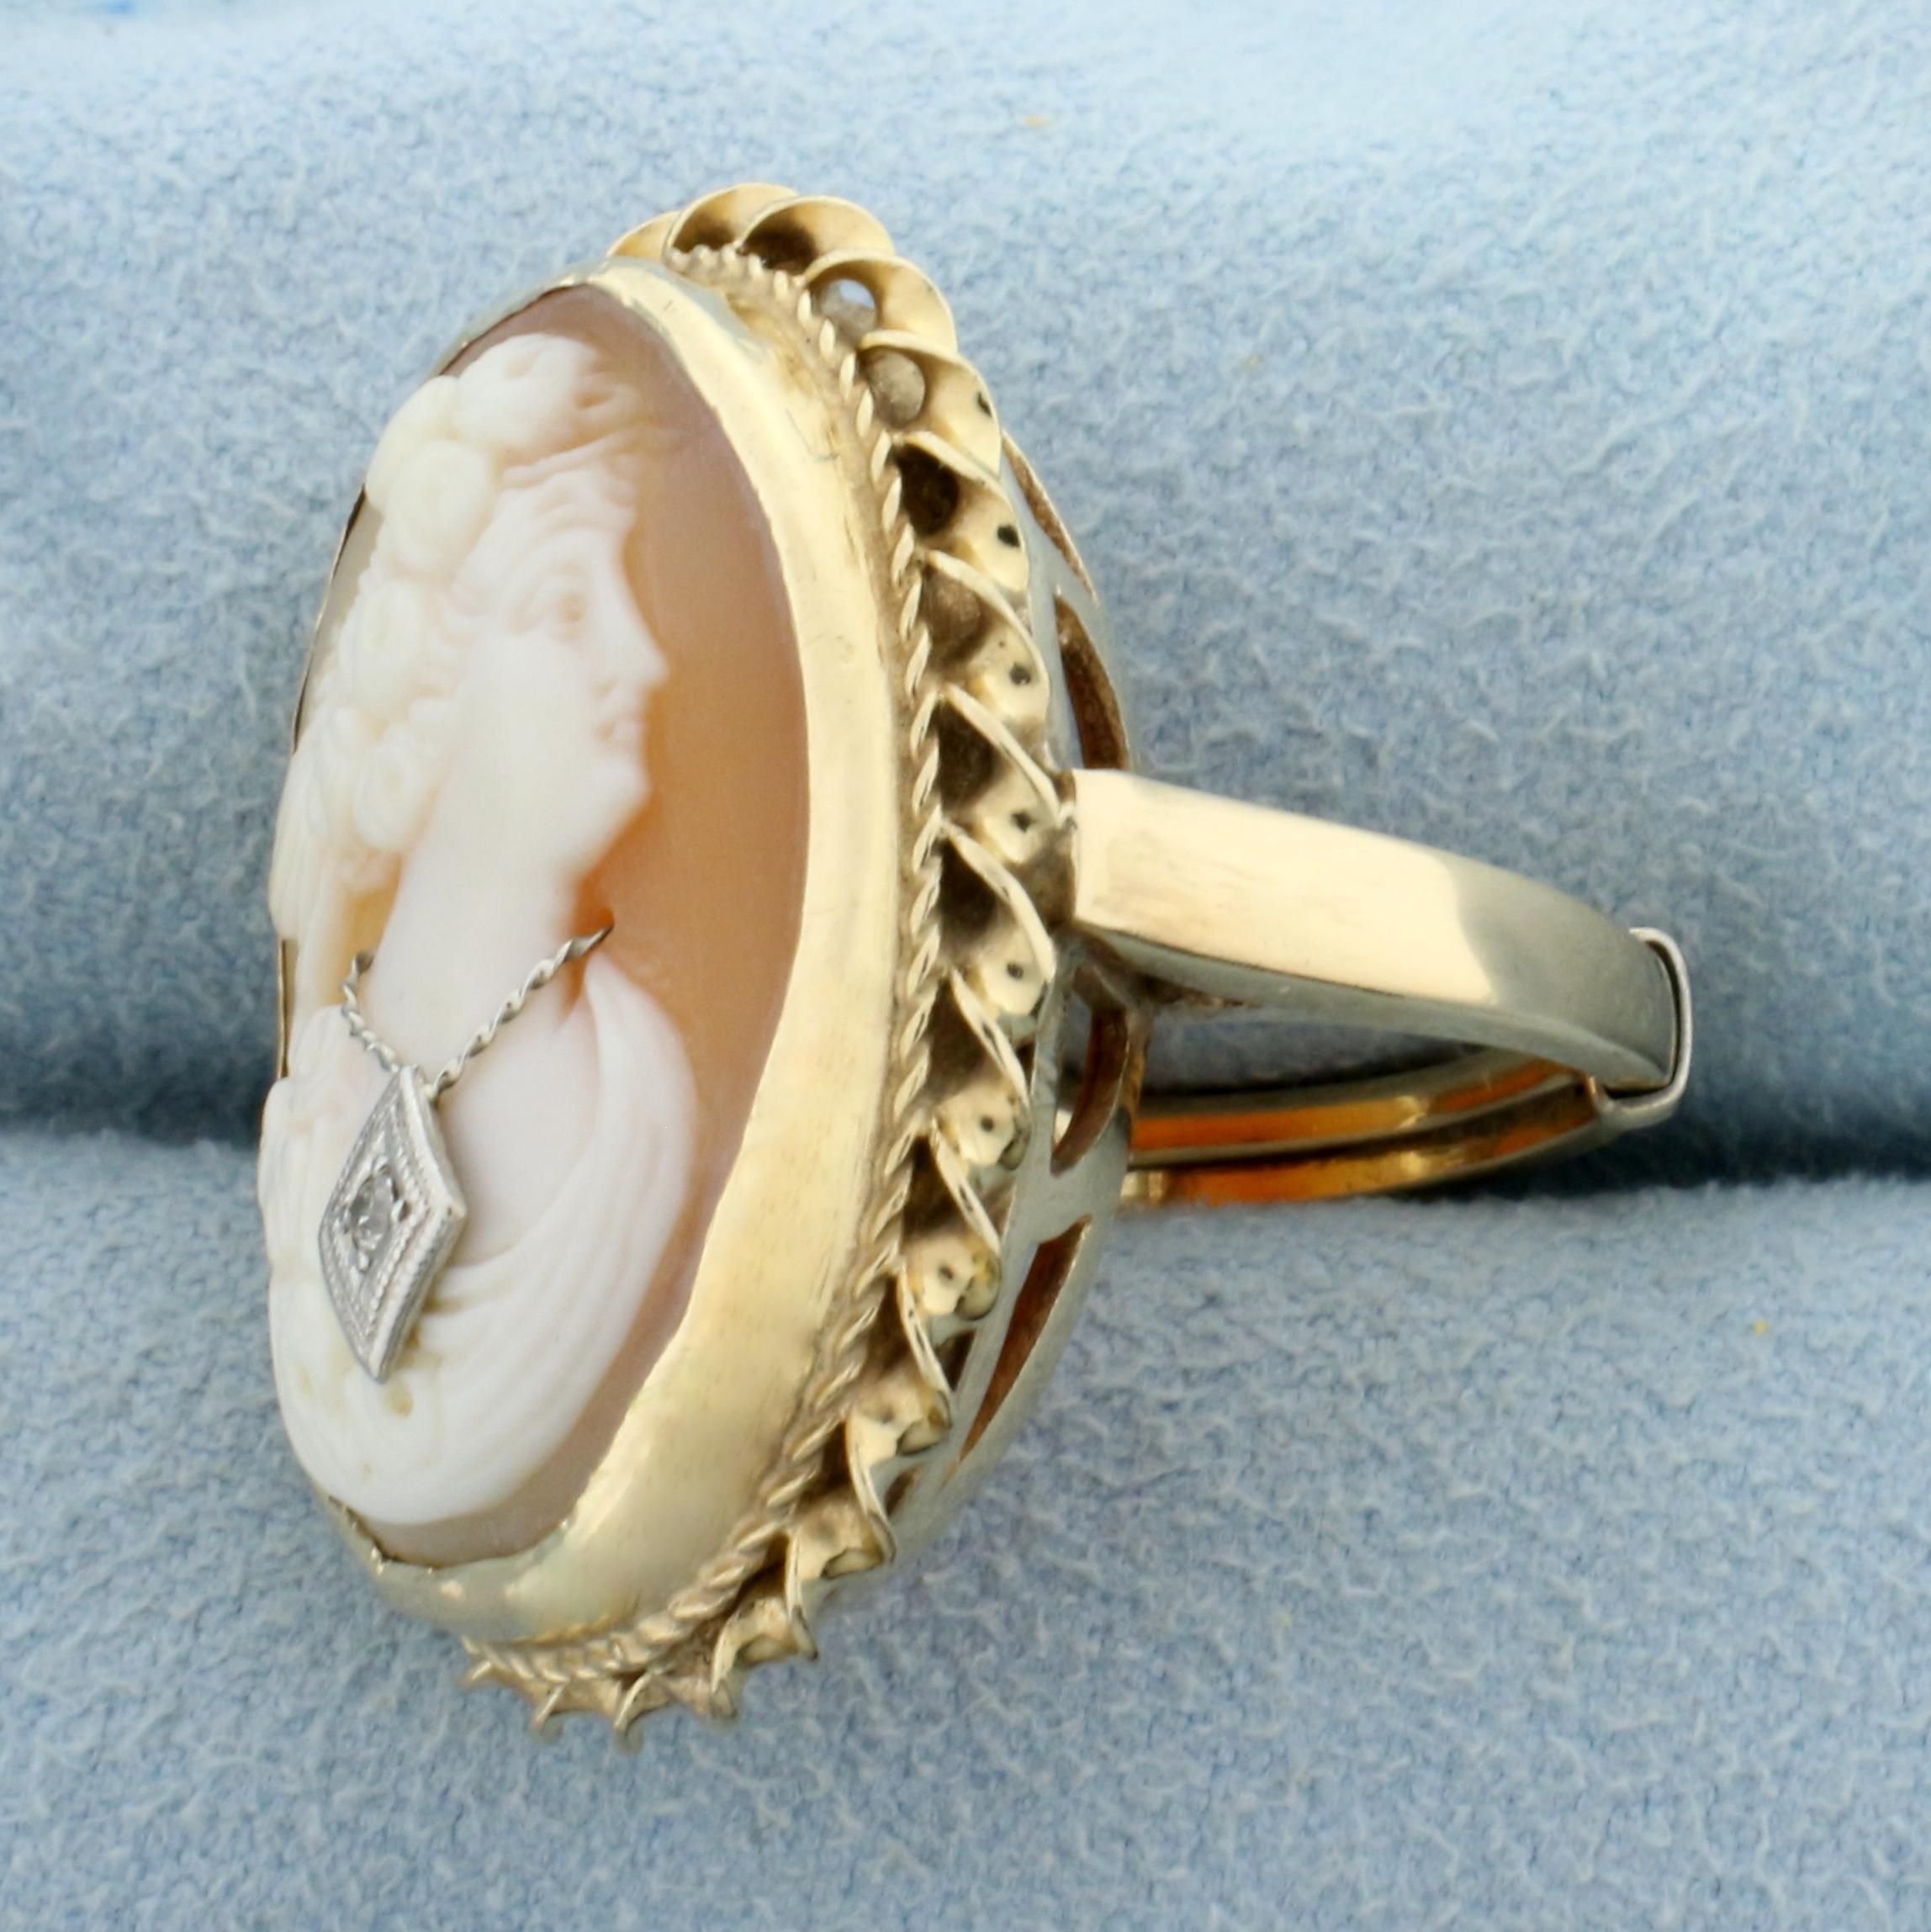 Diamond Cameo Ring In 14k Yellow And White Gold